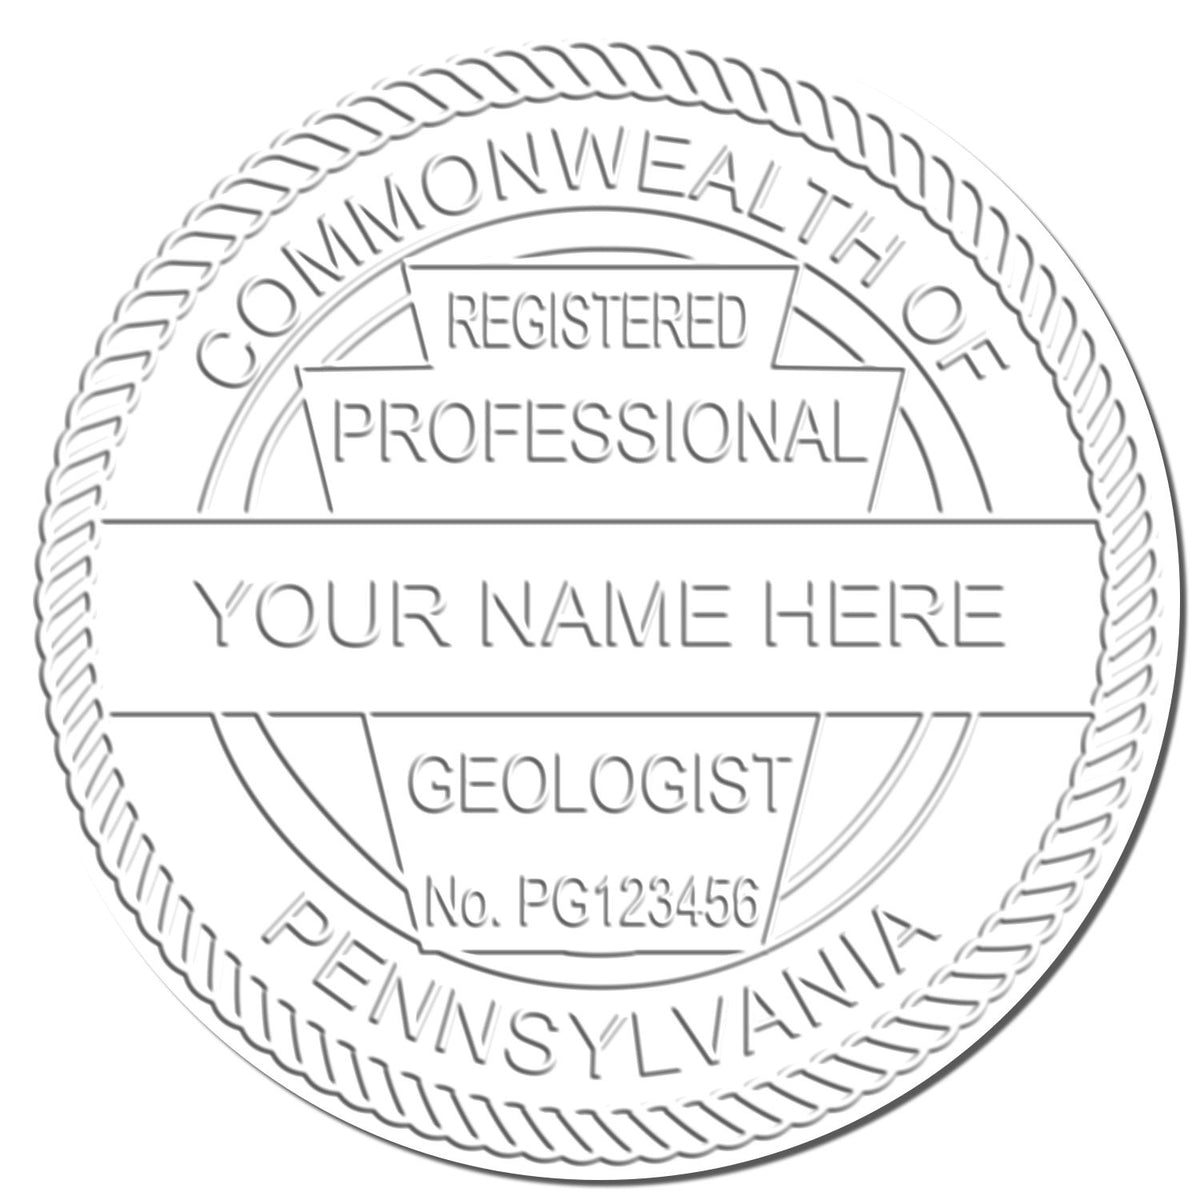 The Pennsylvania Geologist Desk Seal stamp impression comes to life with a crisp, detailed image stamped on paper - showcasing true professional quality.